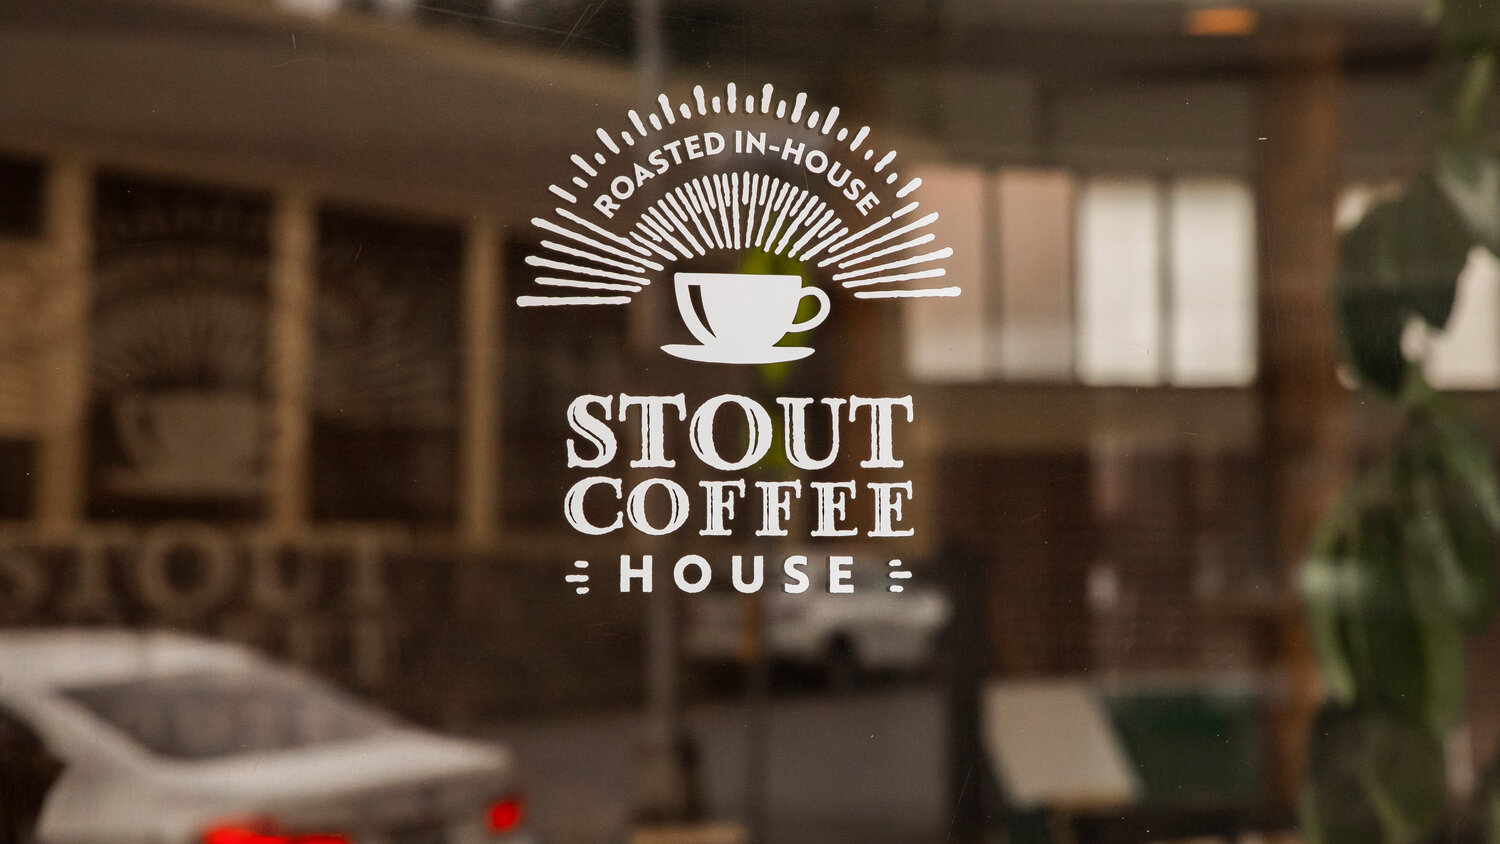 Stout Coffee House is located at 517 Northwest Pacific Ave. in Chehalis.